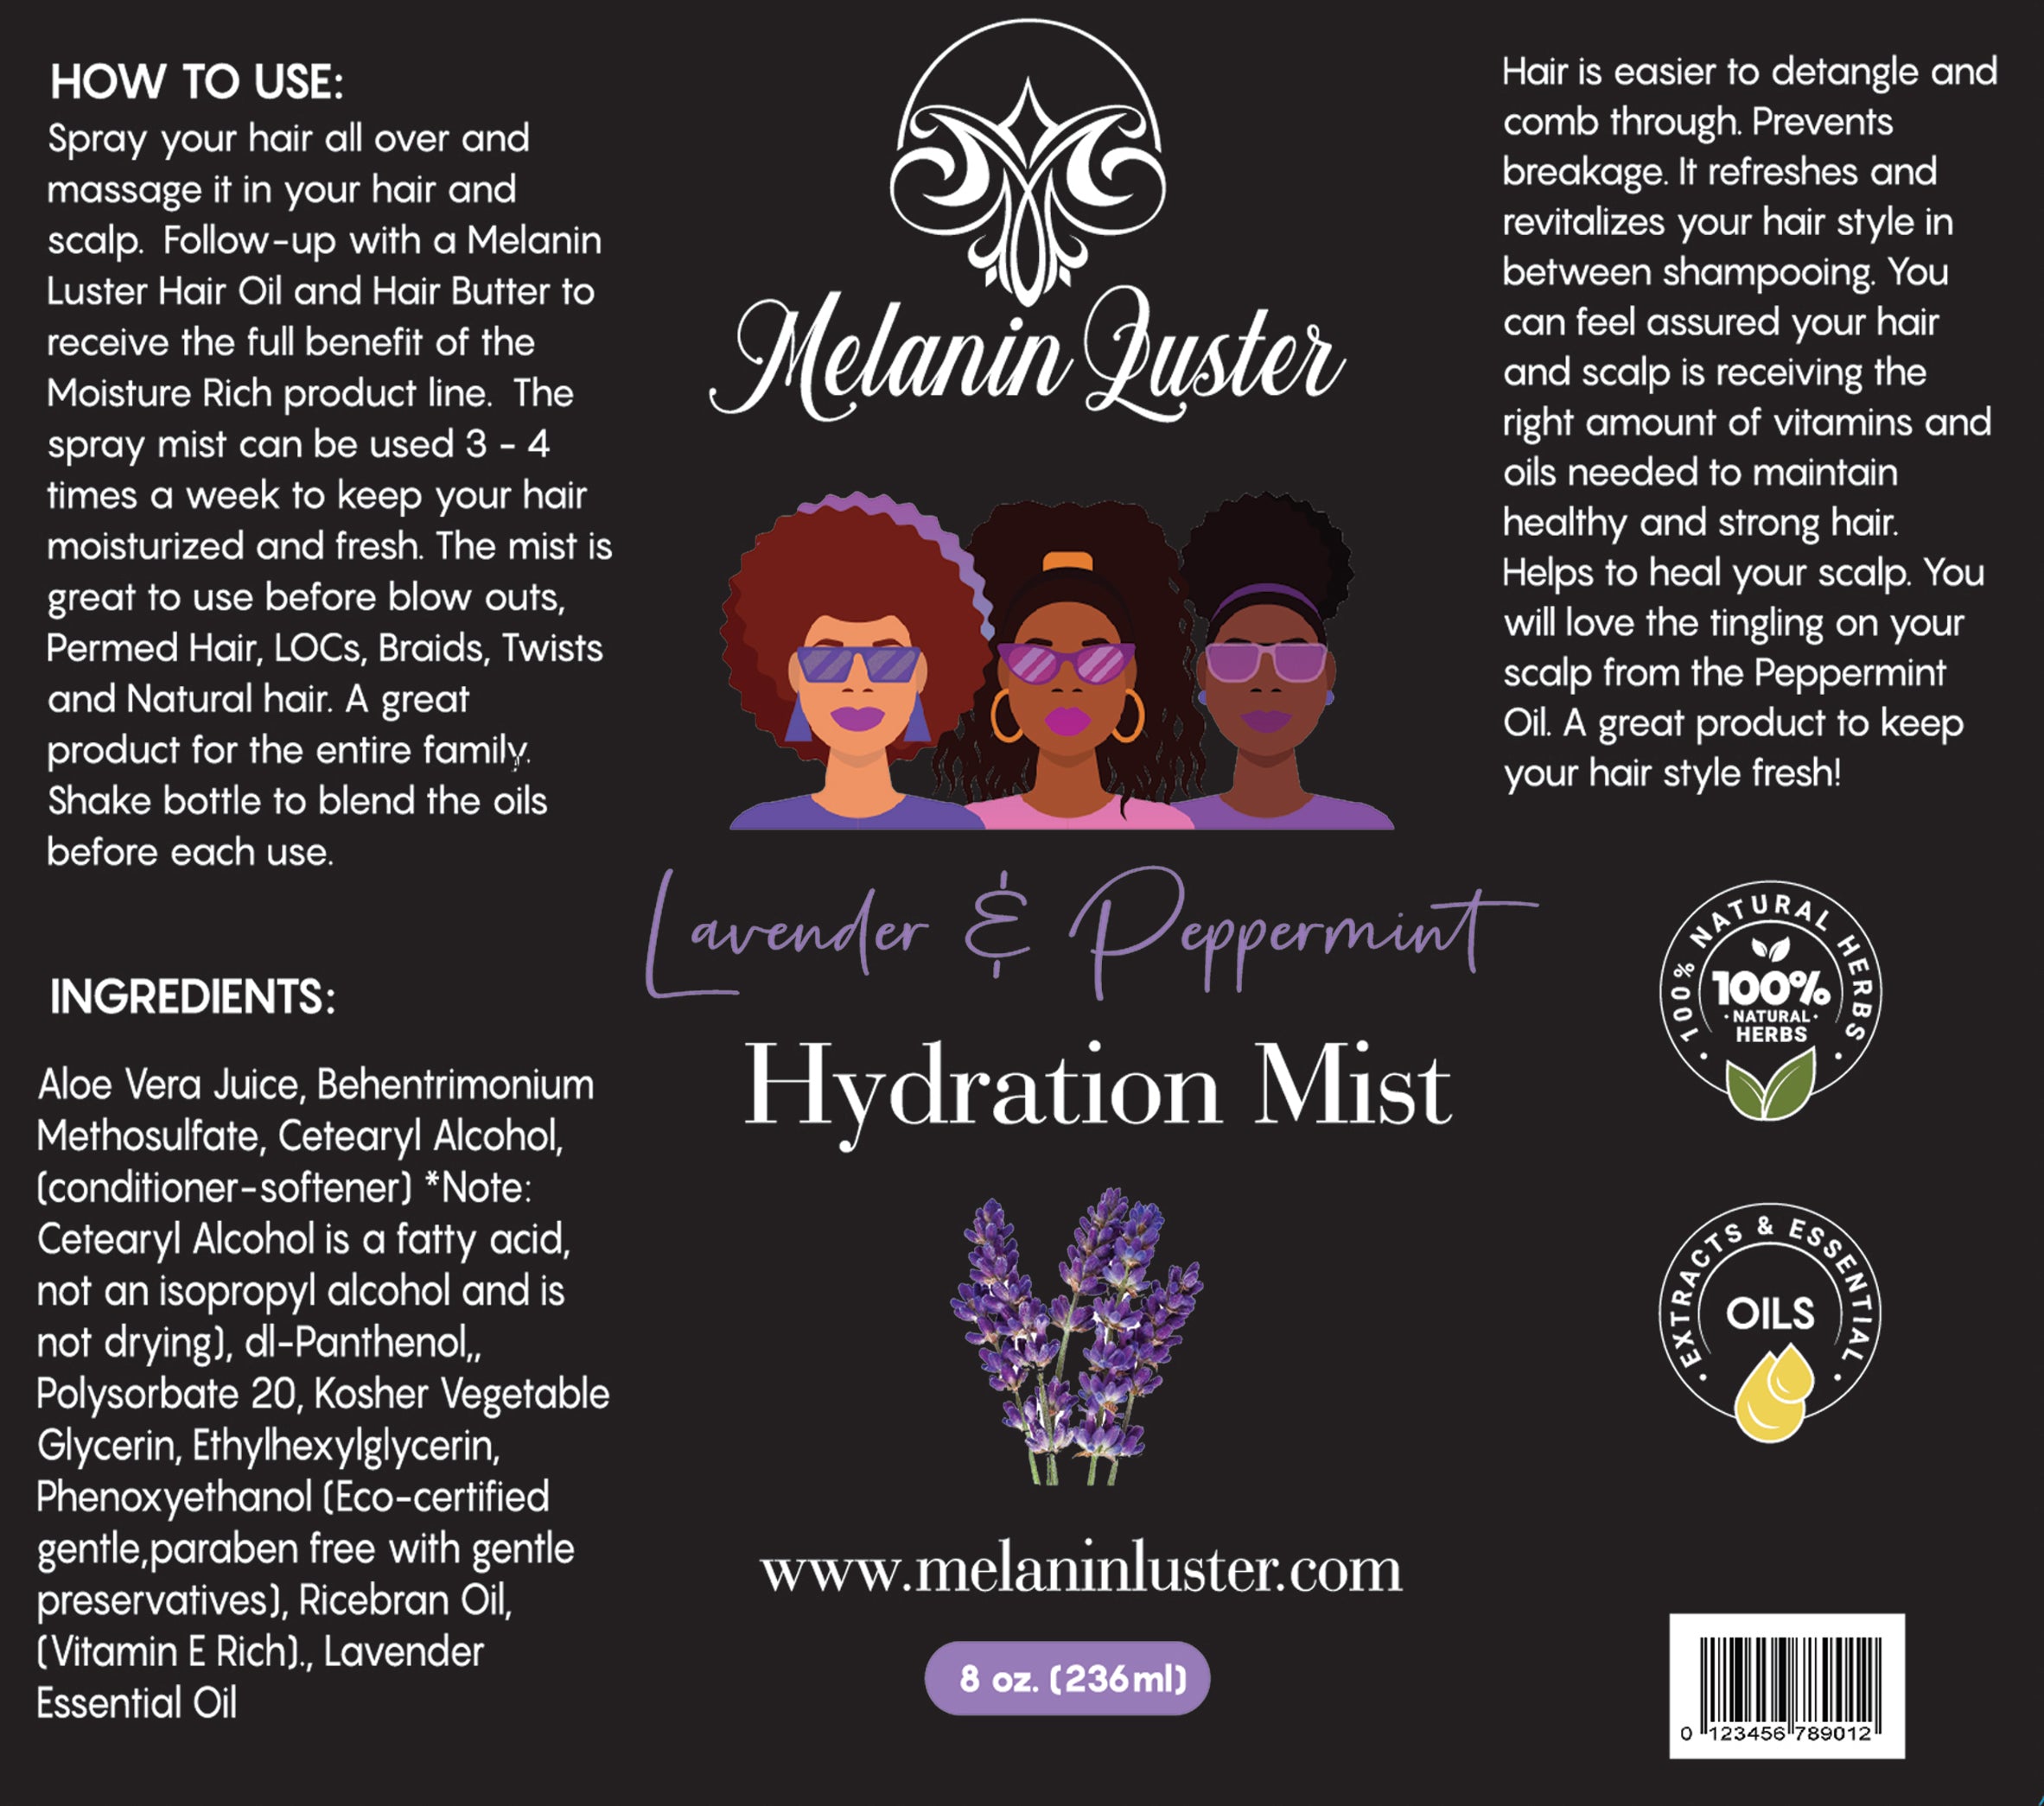 Lavender and Peppermint Hair Mist